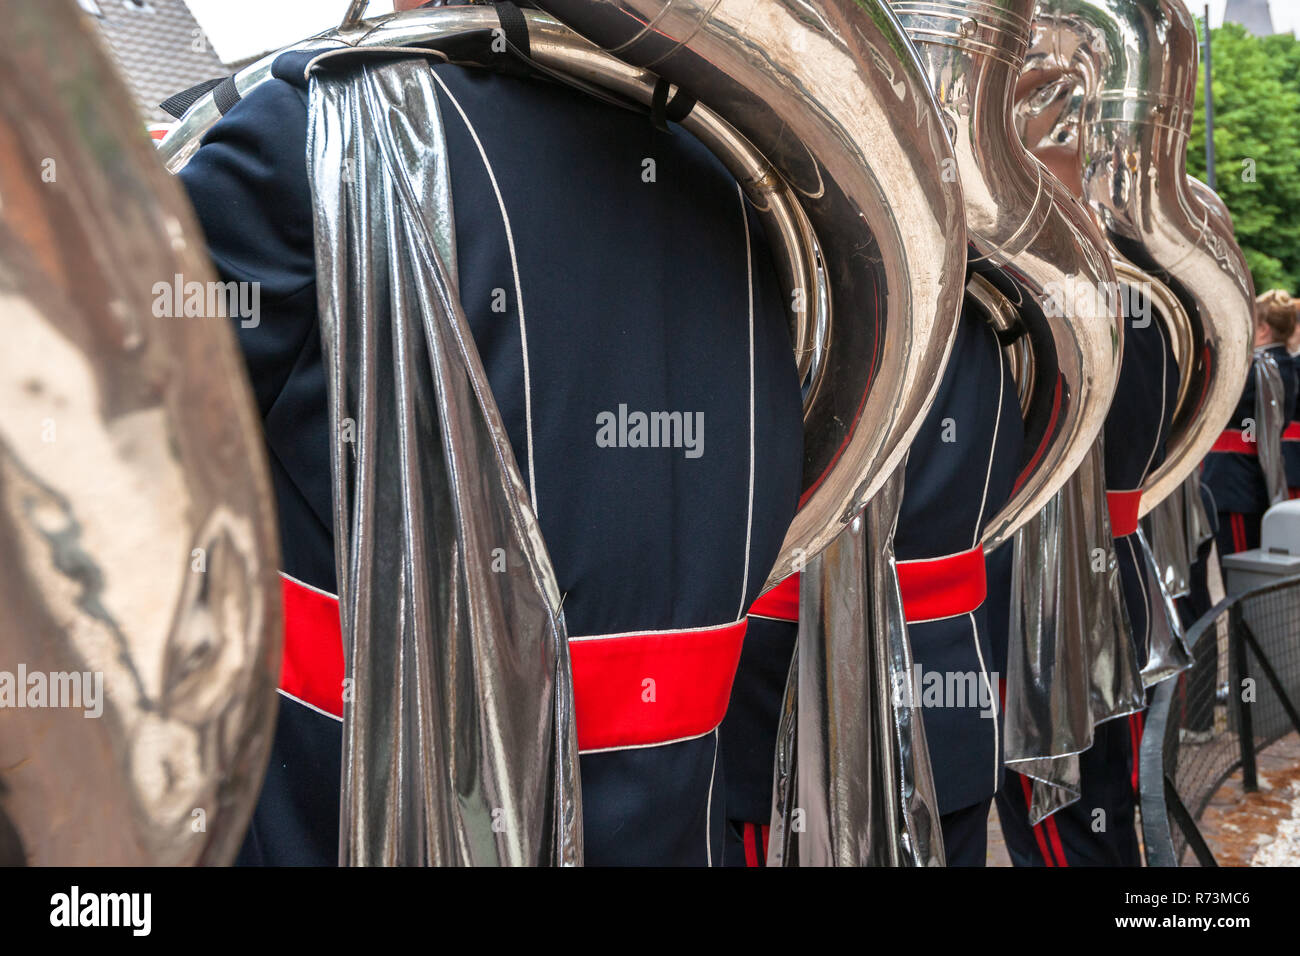 Details from a music, show and marching band. Playing musicians wind instruments in uniforms. Tuba, Sousa Stock Photo